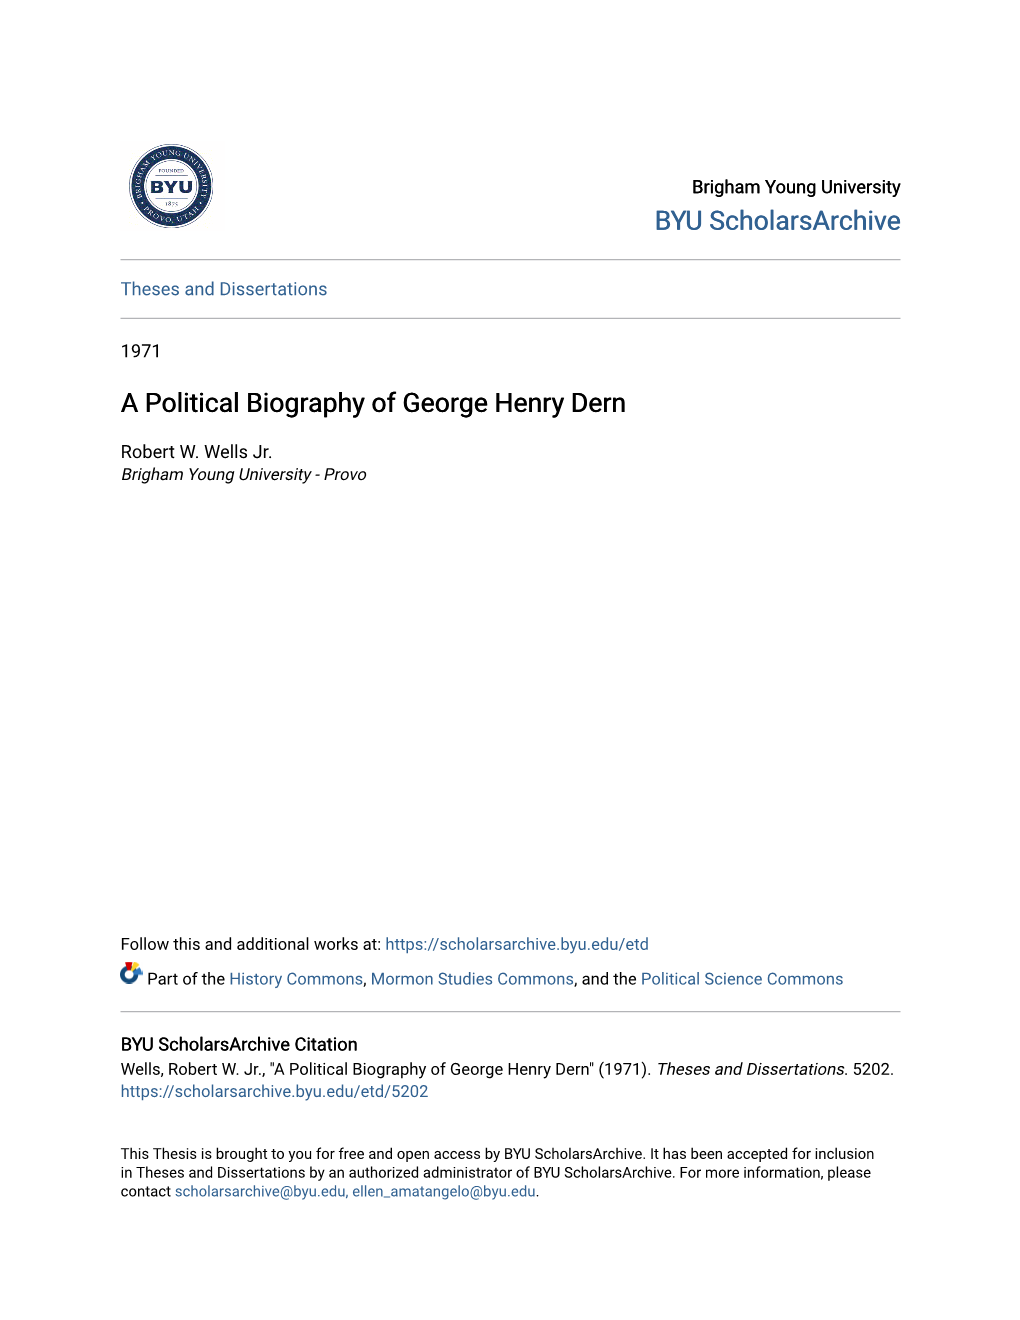 A Political Biography of George Henry Dern